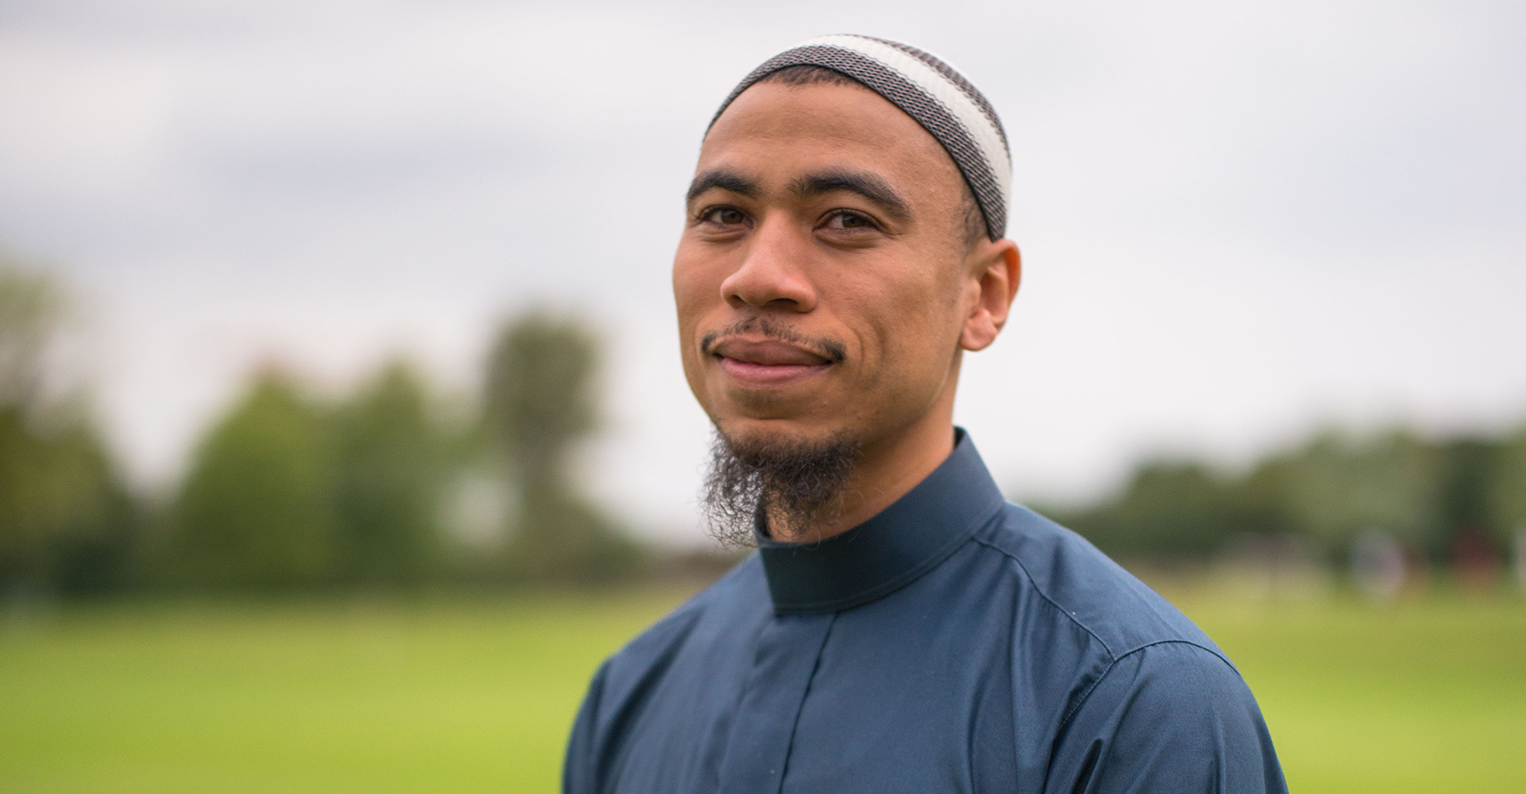 Ibrahim Jaaber wears a Muslim hat and garb in front of an open field.